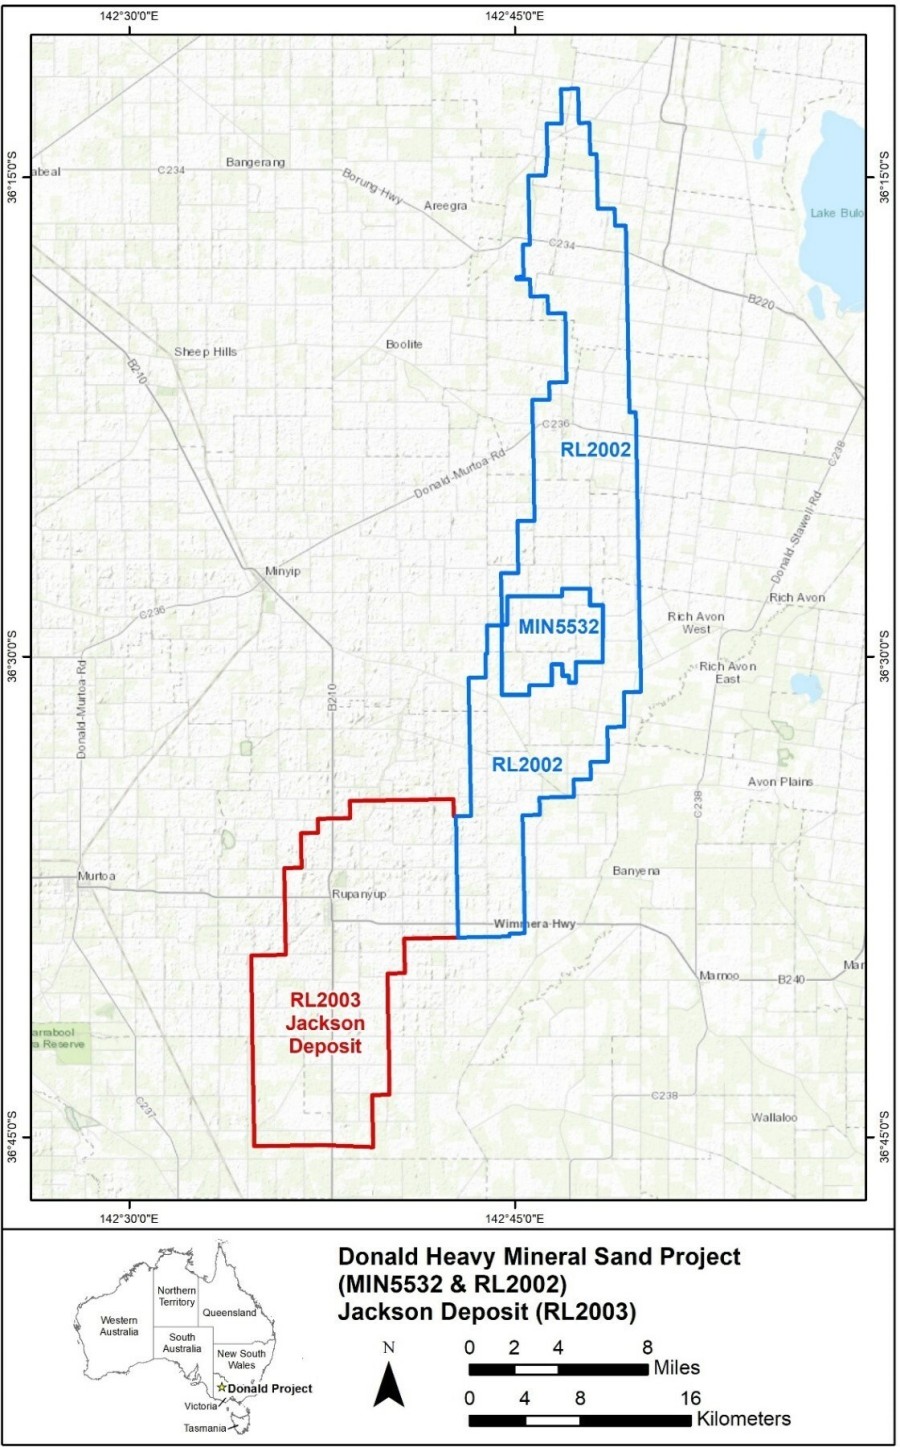 Figure 1 - The Donald Project Joint Venture Area (Blue), along with the Jackson Deposit (Red) where the Company holds a right of first refusal on development (CNW Group/Energy Fuels Inc.)